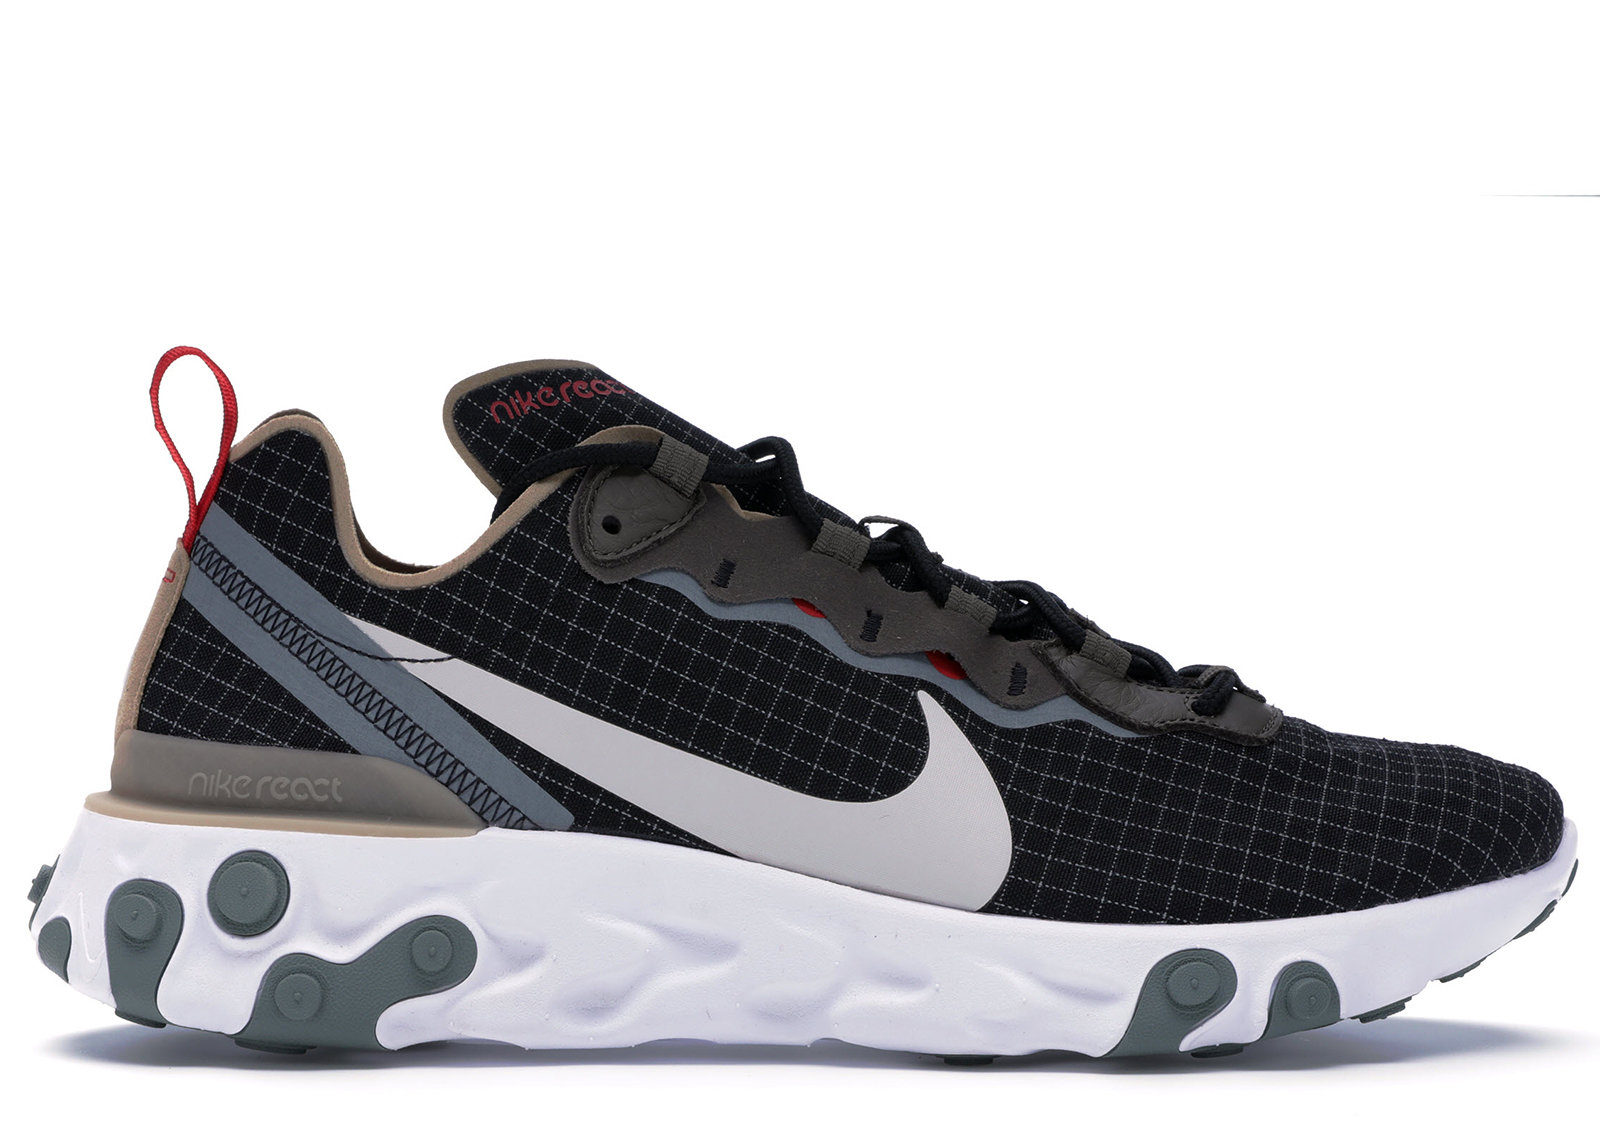 Nike React Element 55 size? - Sneakers